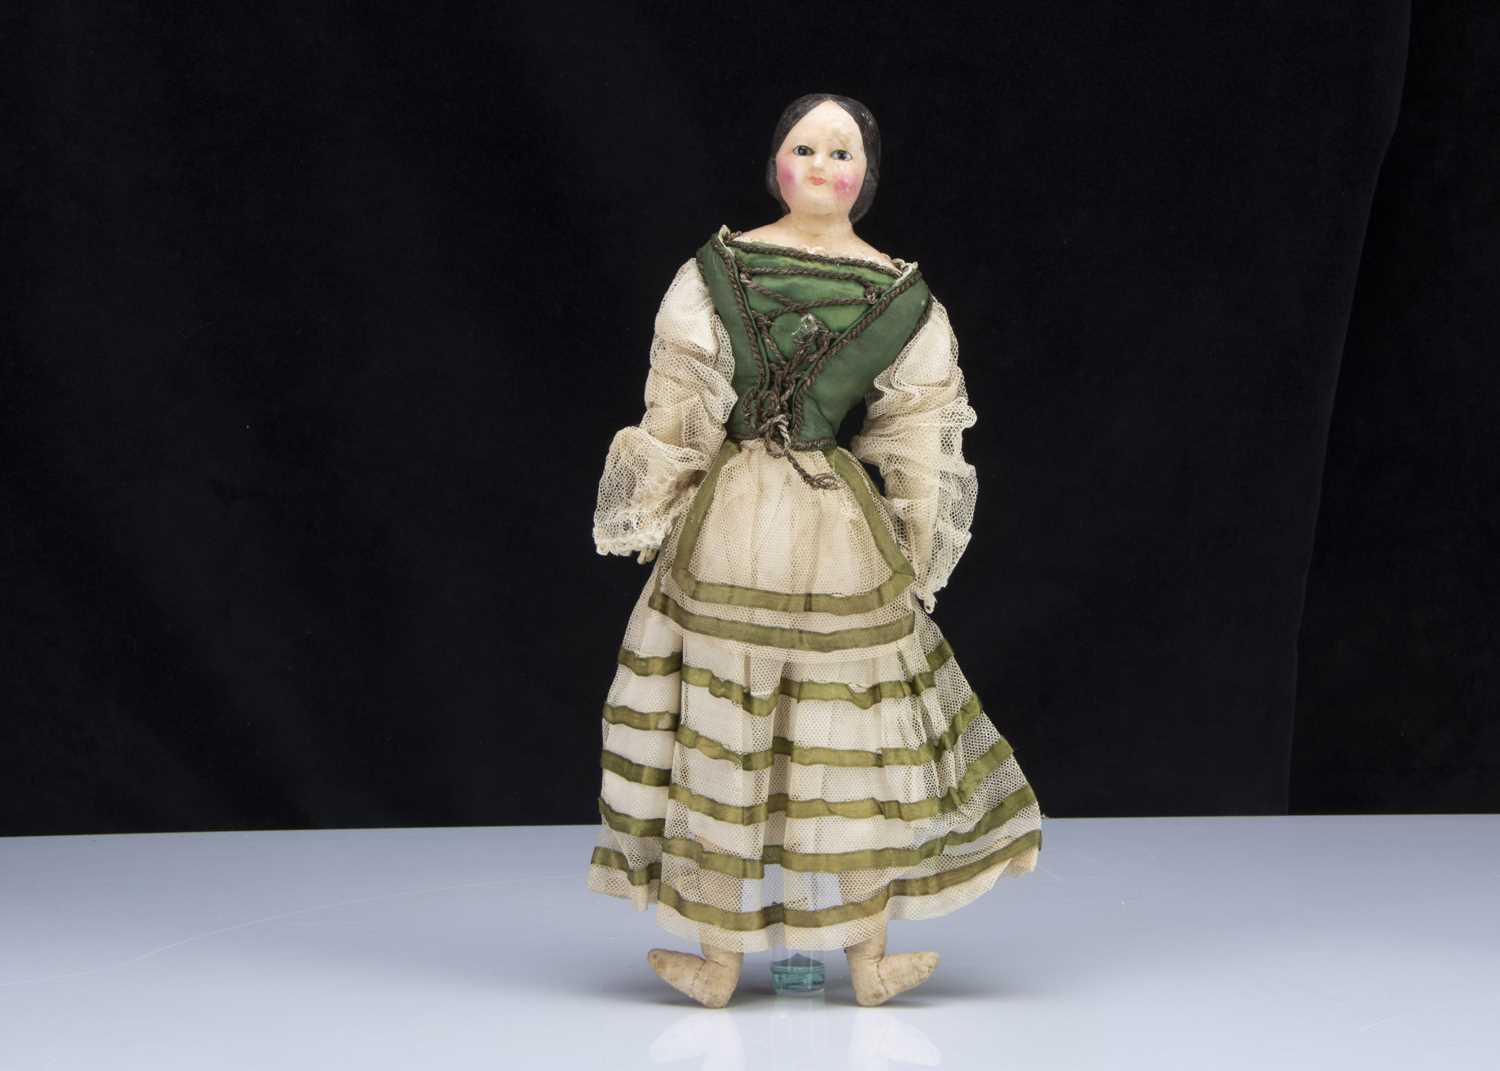 Lot 55 - A 19th century German papier-mache doll with dipped wax finish